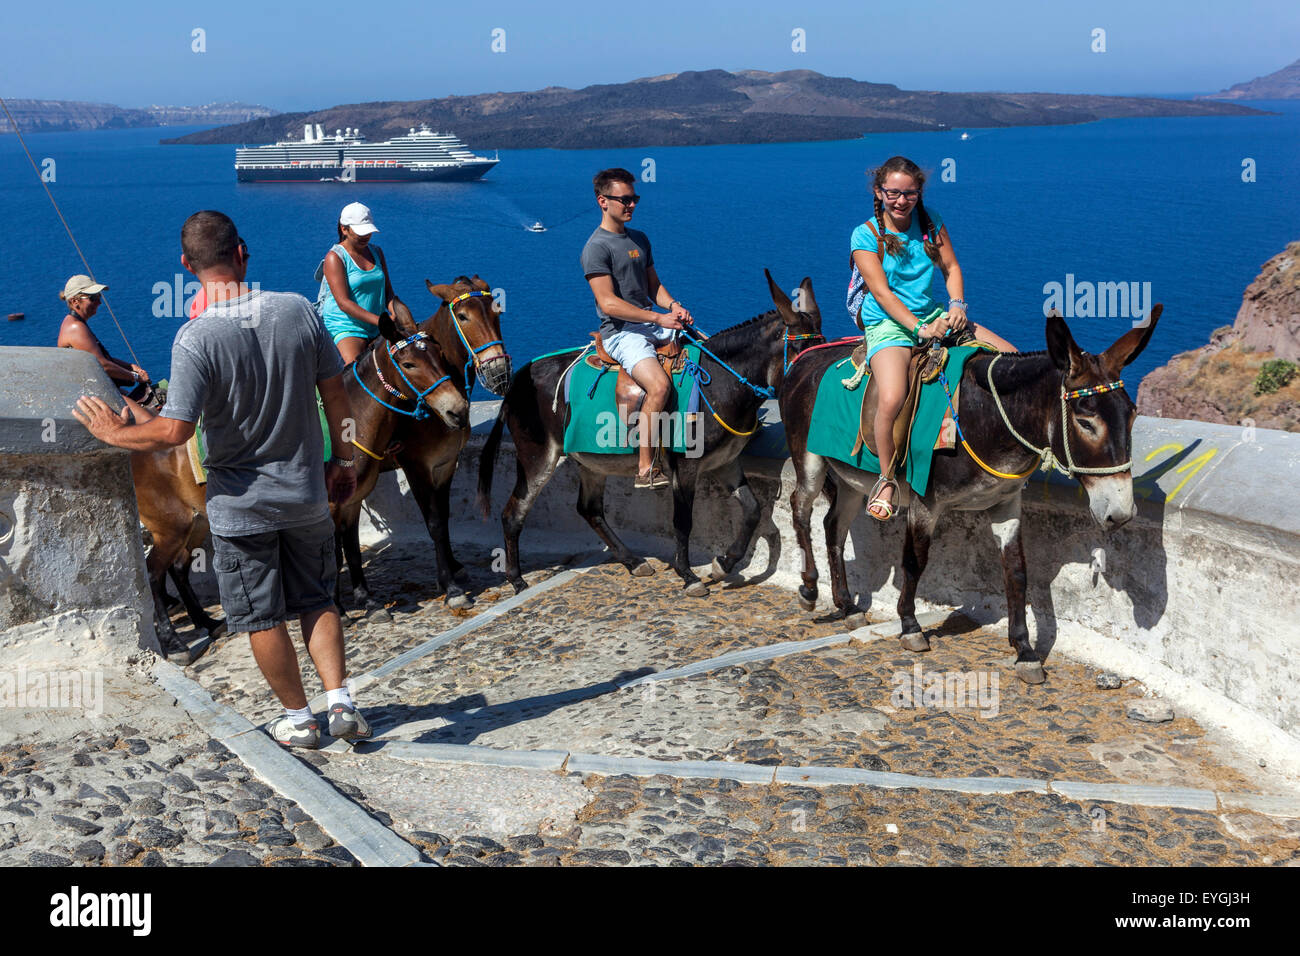 Santorini donkeys carrying tourists on the road linking the port to the town of Fira Greek Island, Cyclades, Santorini Greece tourism Stock Photo